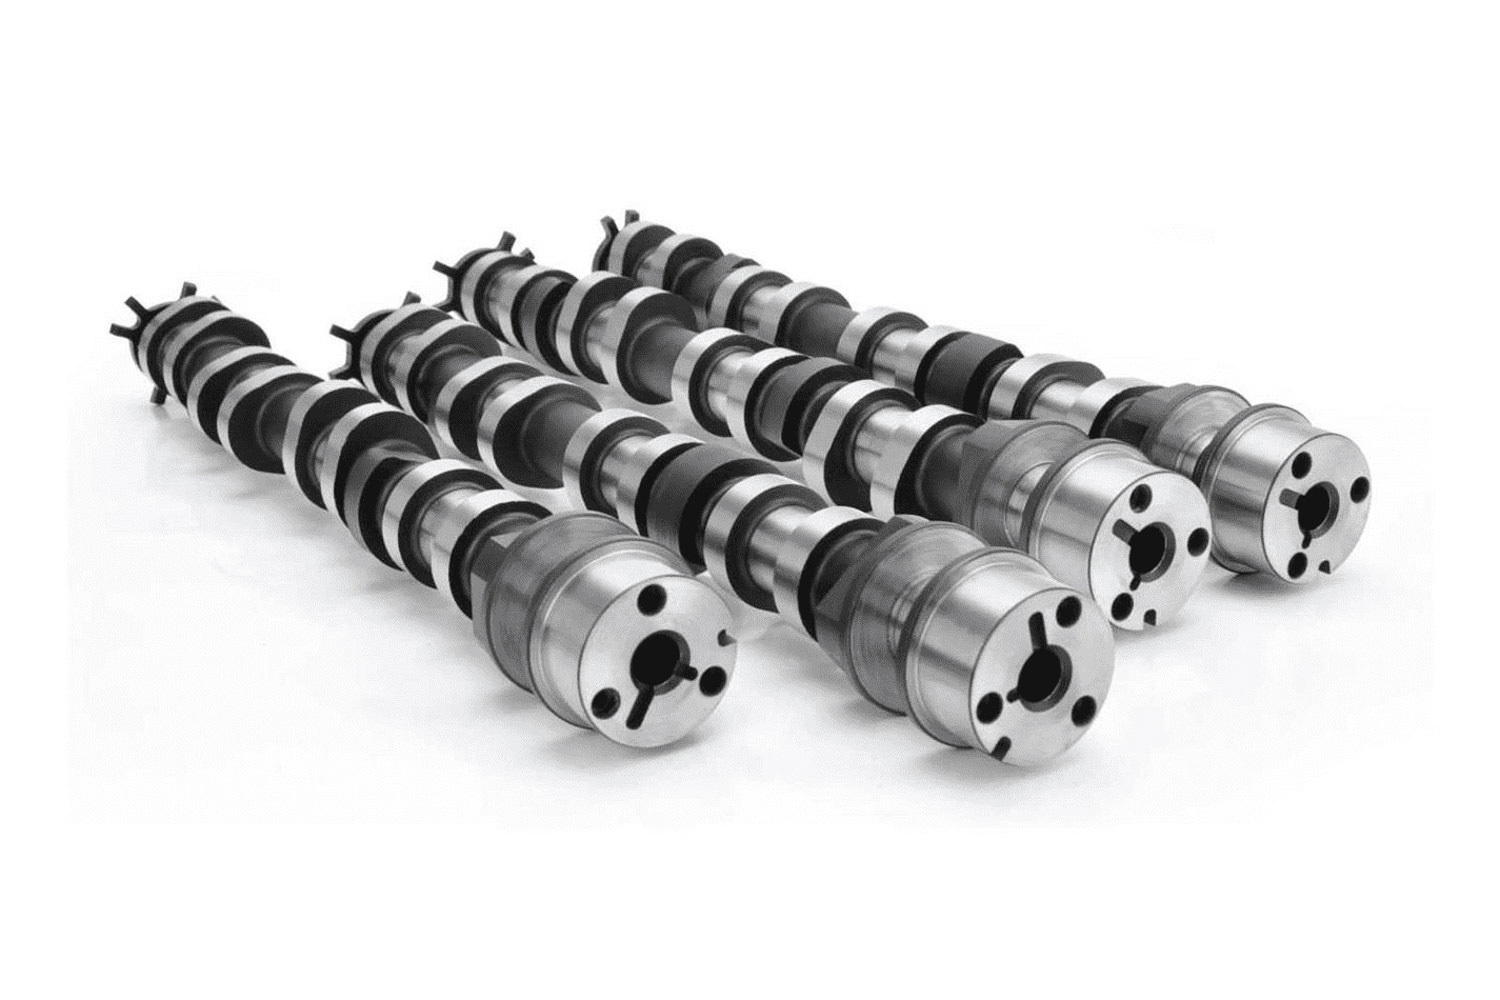 Comp Cams 191710 Camshaft, Thumper NSR, Hydraulic, Lift 0.492 / 0.470 in, Duration 268 / 307, 127 LSA, 1900 / 7300 RPM, Ford Coyote, Set of 4